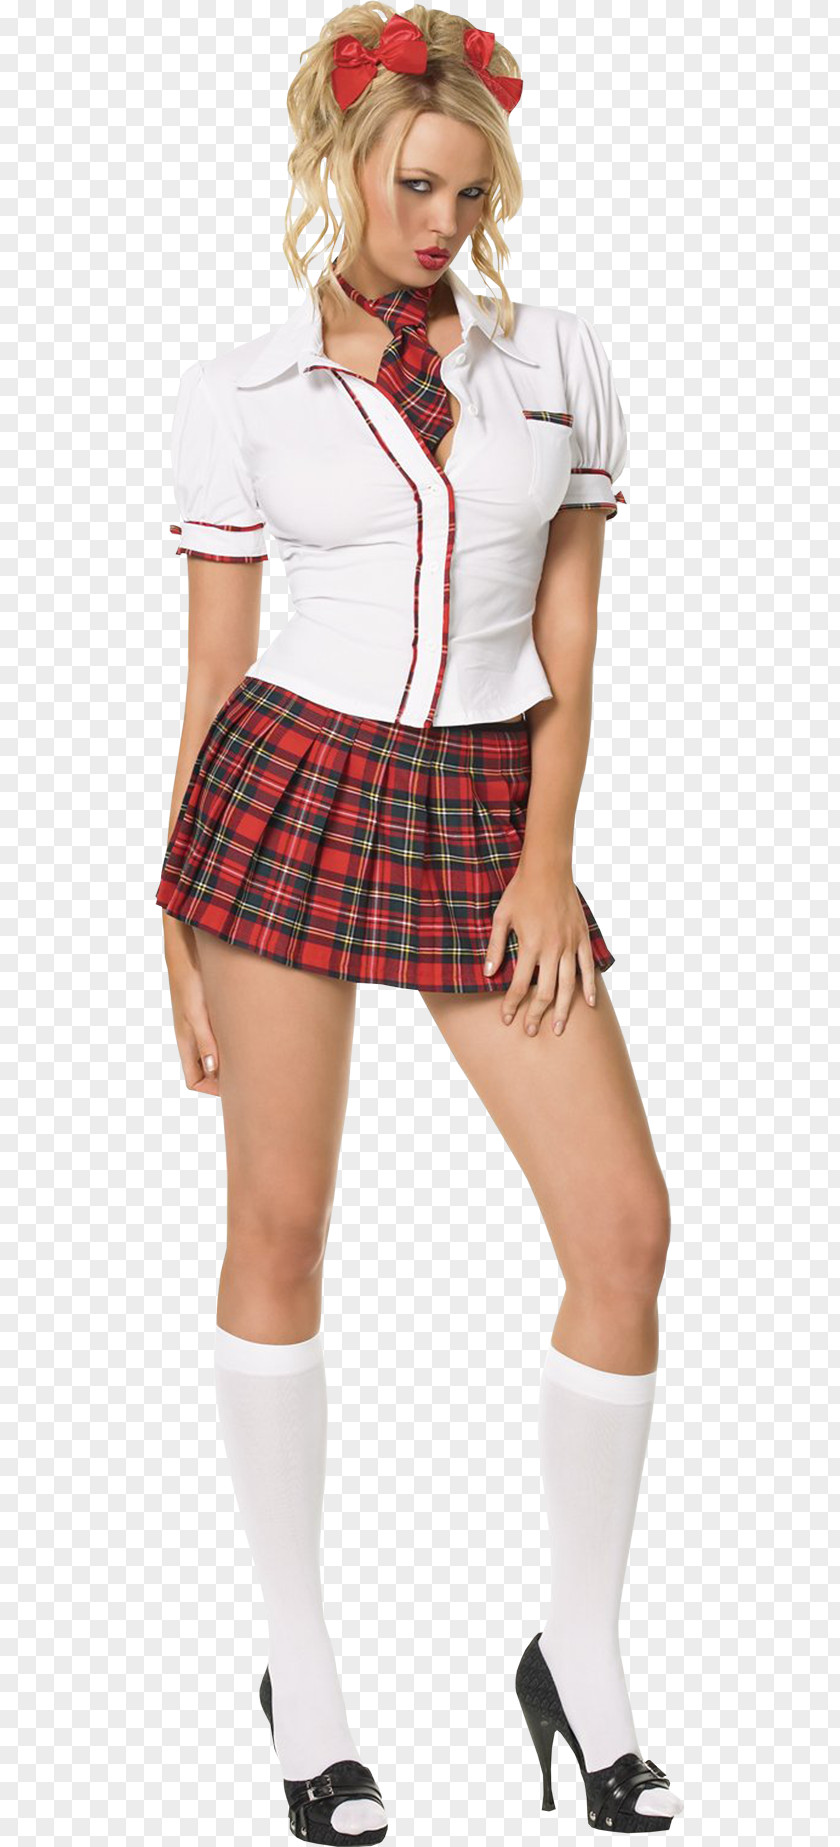 Hillary Clinton United States Conspiracy Theory Assassination Of John F. Kennedy Humour PNG theory of Humour, Sexy woman girl , wearing red, green, and black skirt white uniform clipart PNG